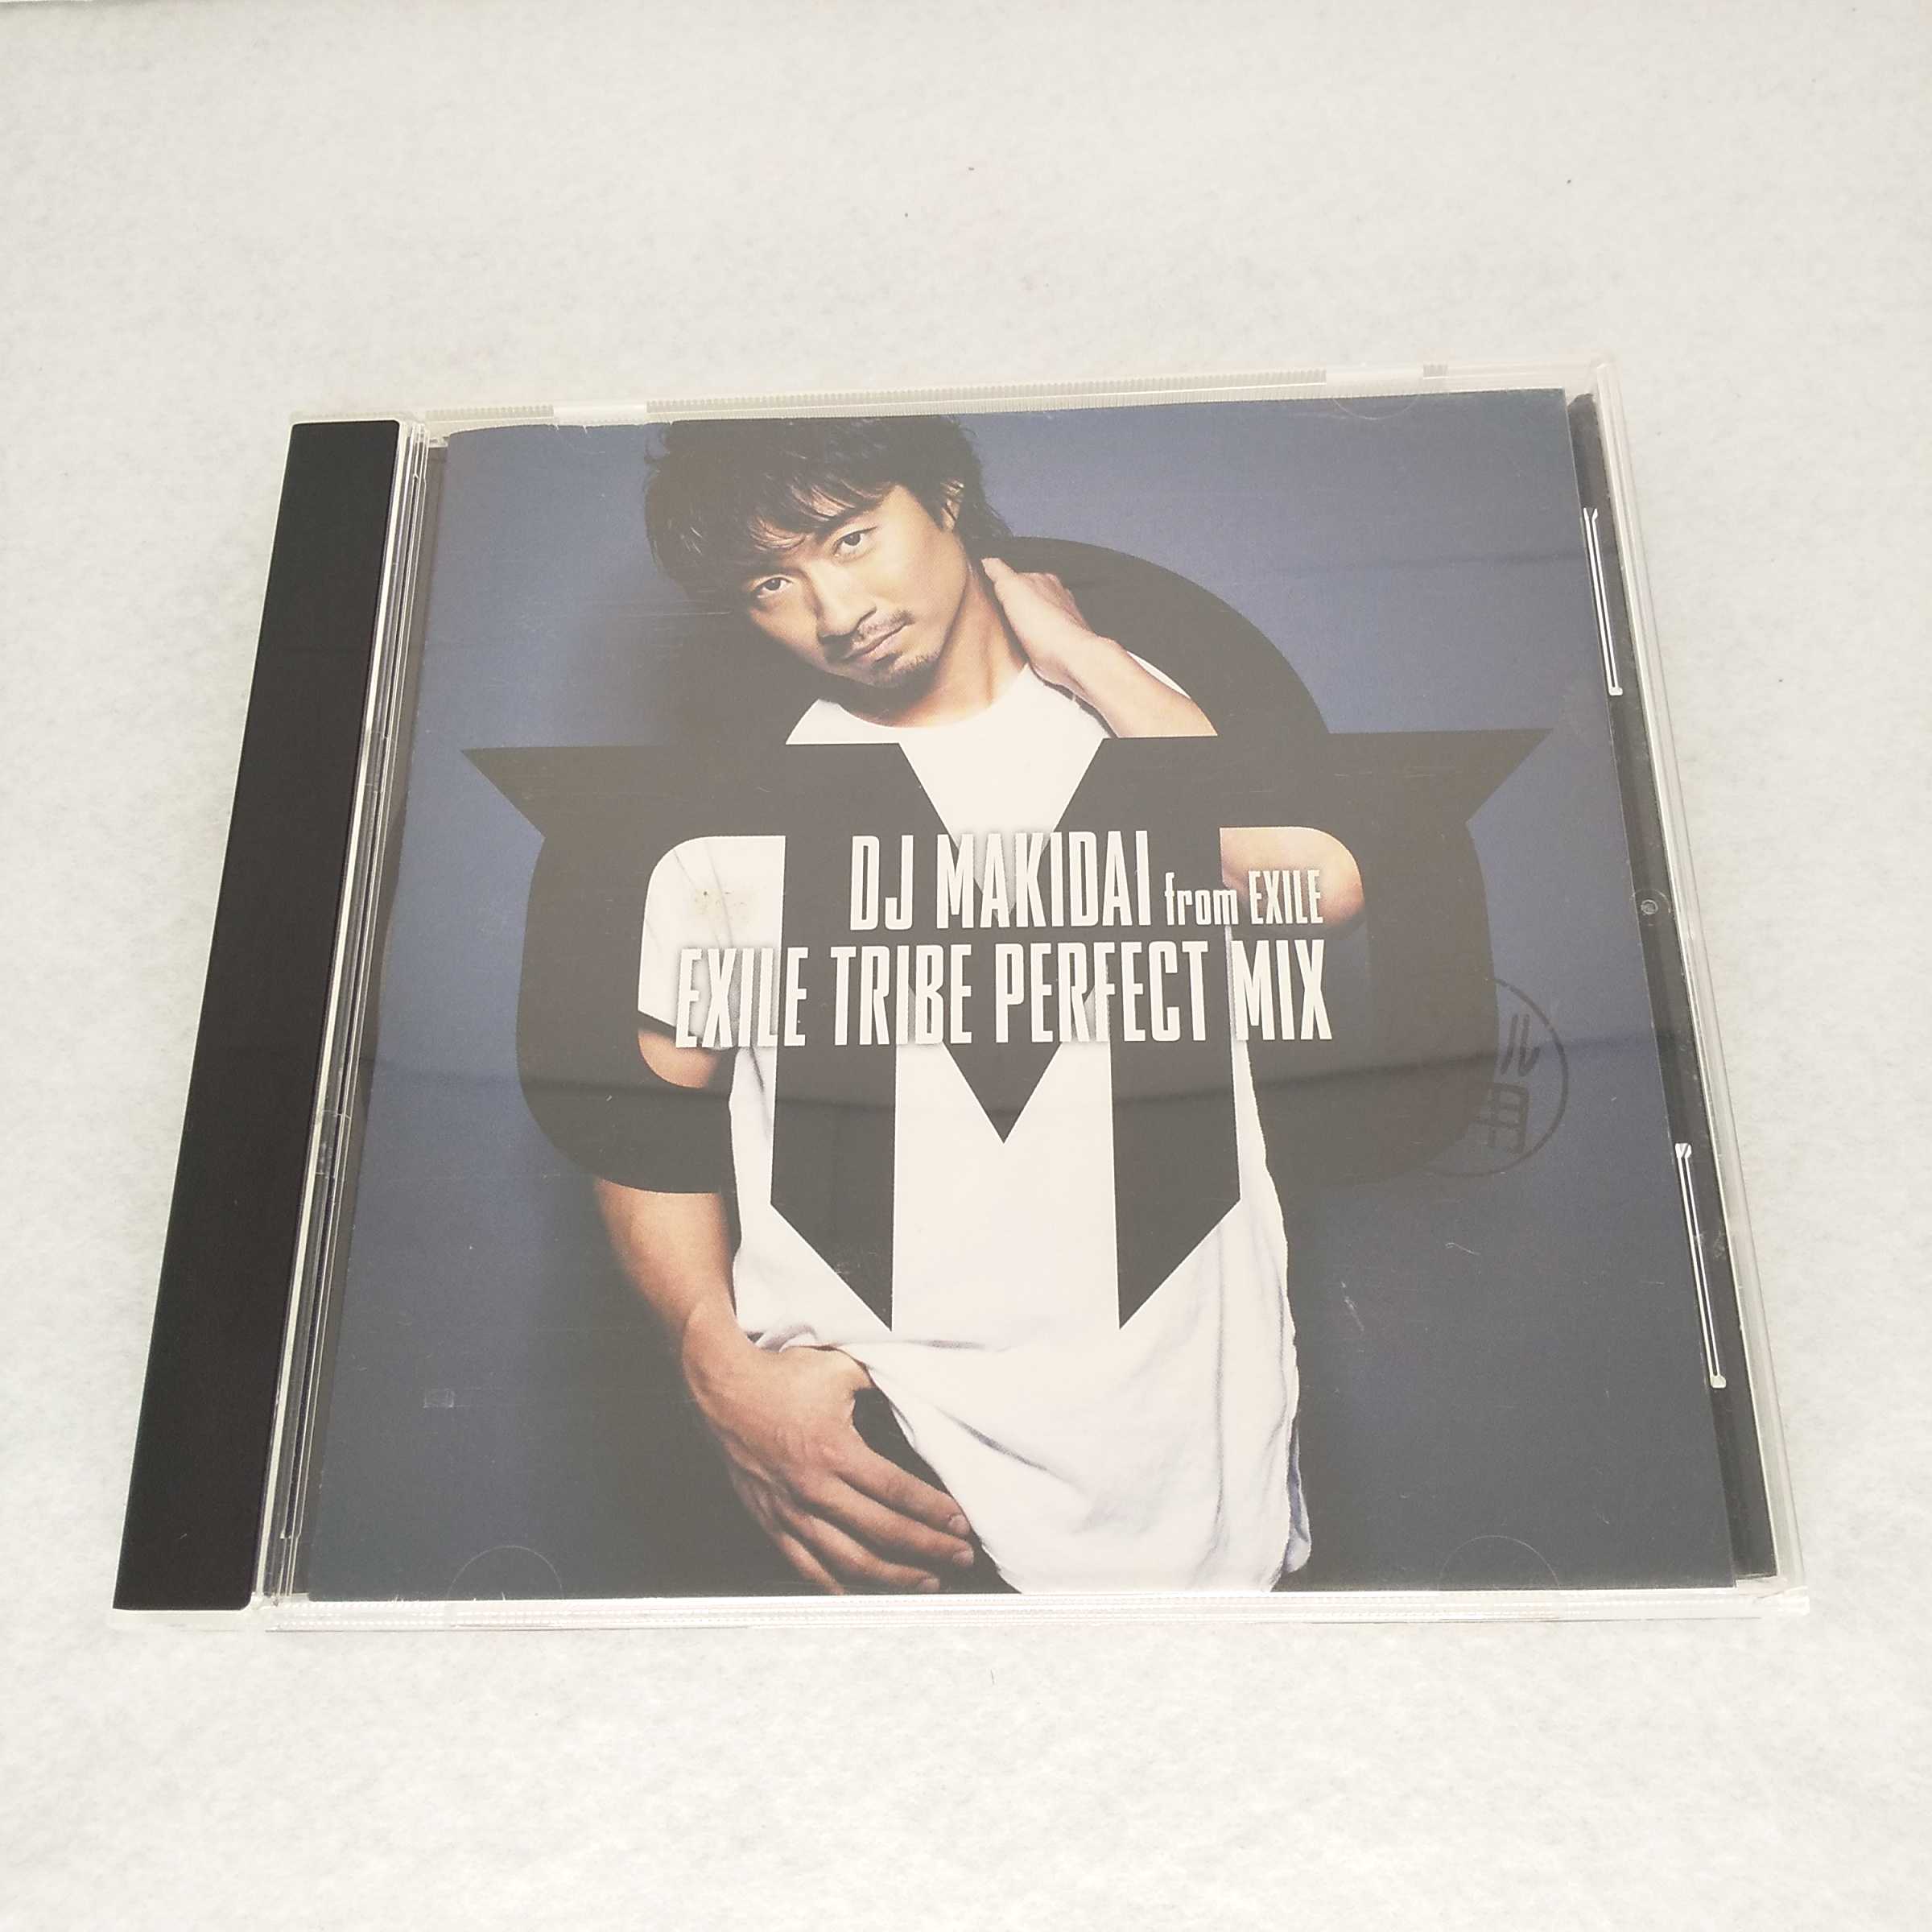 AC11067 【中古】 【CD】 EXILE TRIBE PERFECT MIX/DJ MAKIDAI from EXILE